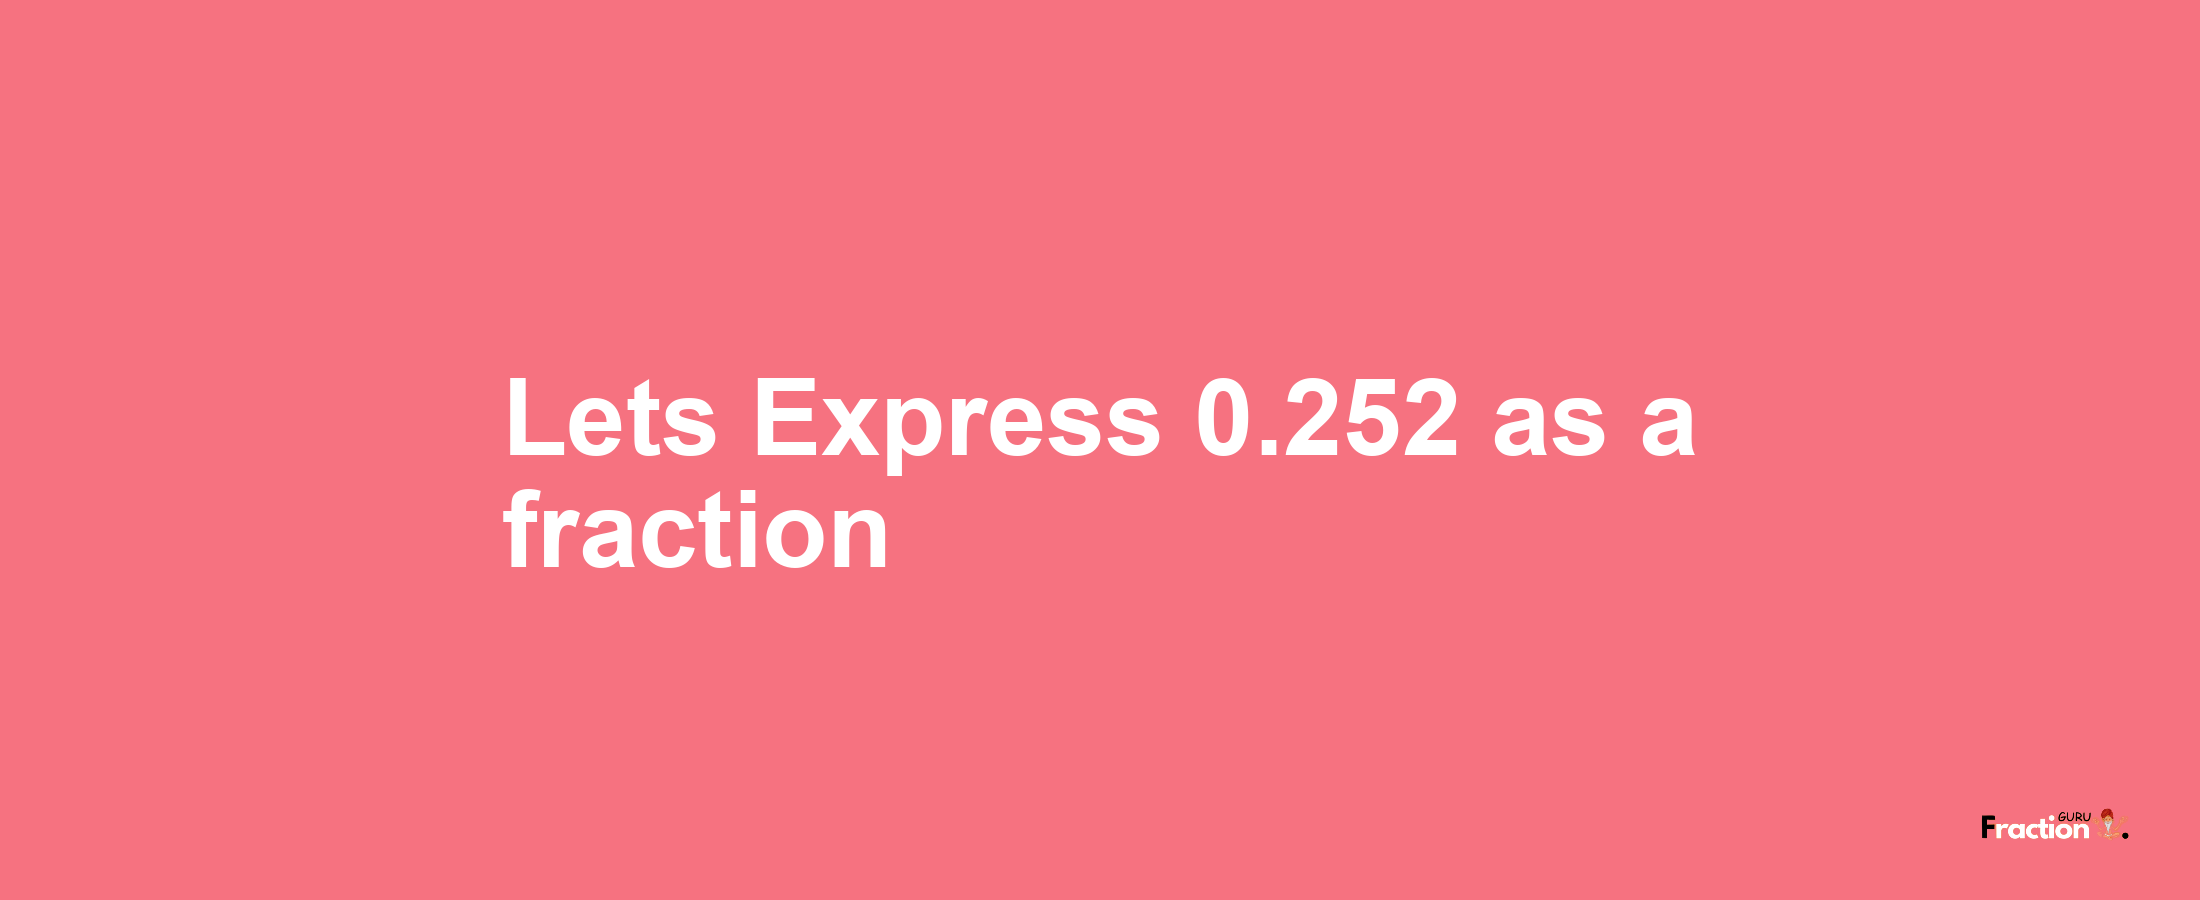 Lets Express 0.252 as afraction